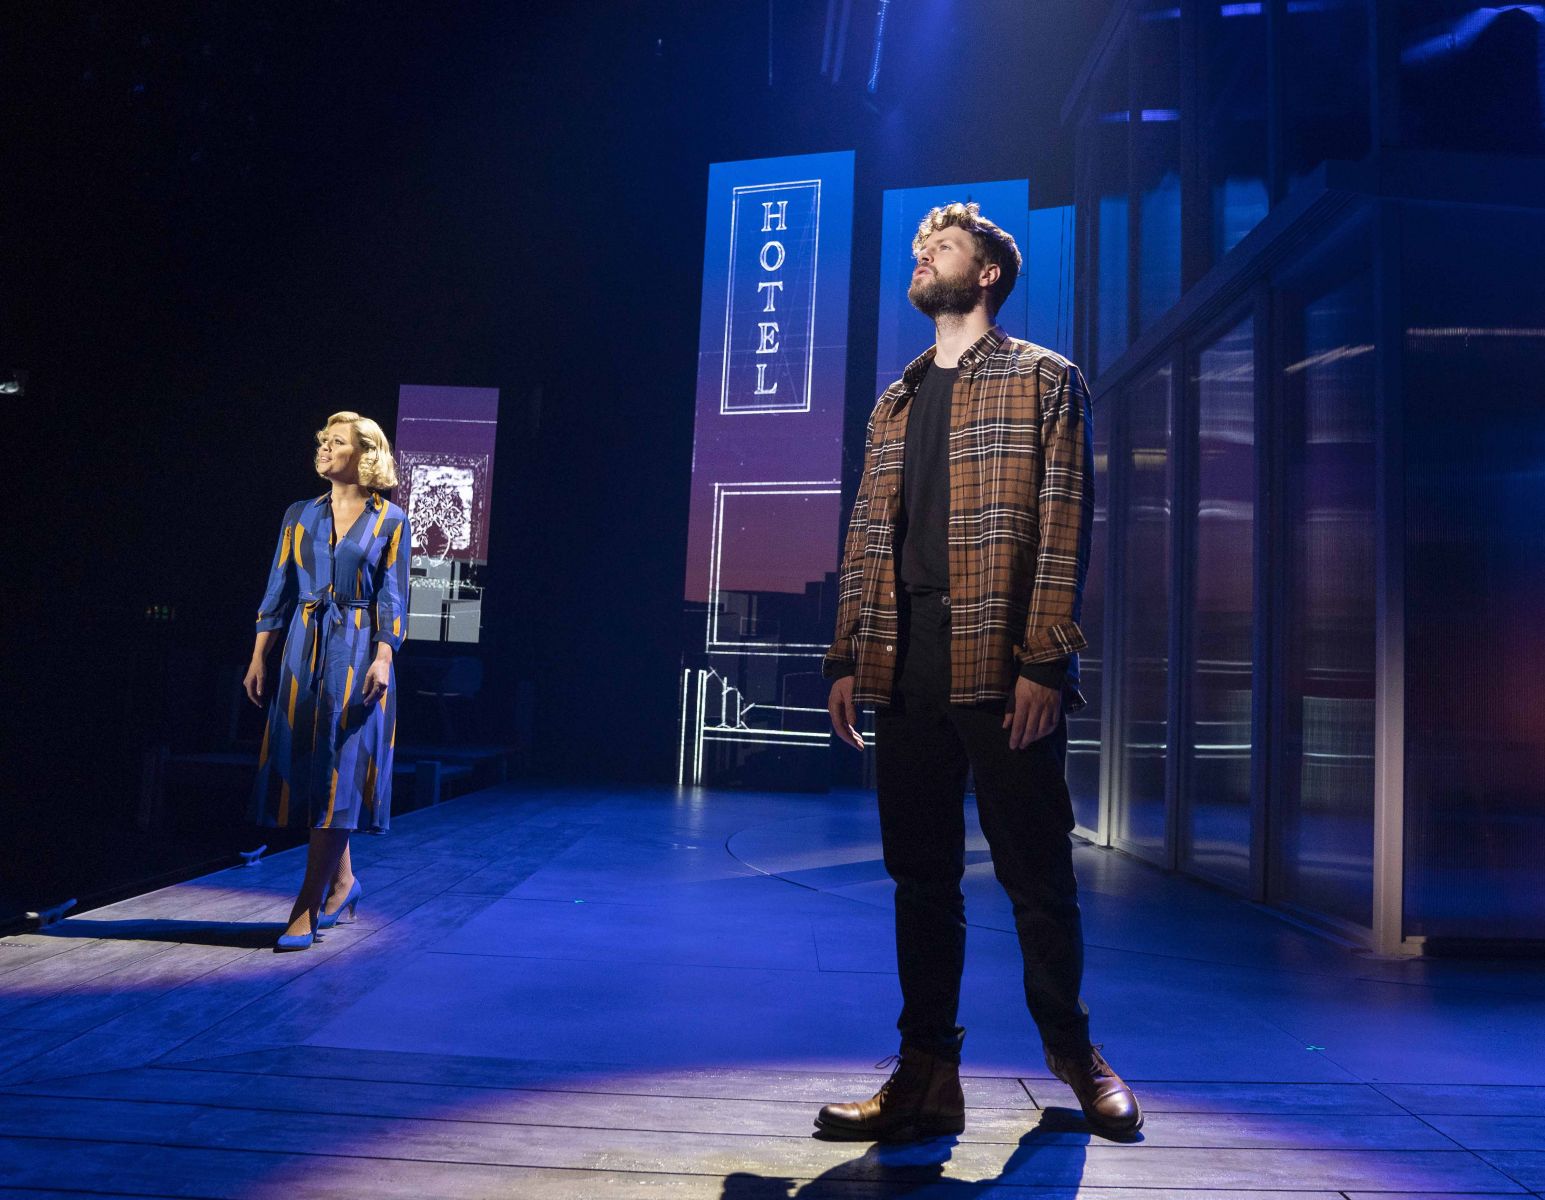 THEATRE REVIEW | Sleepless – Troubadour Wembley Park Theatre – This is what theatre is all about!